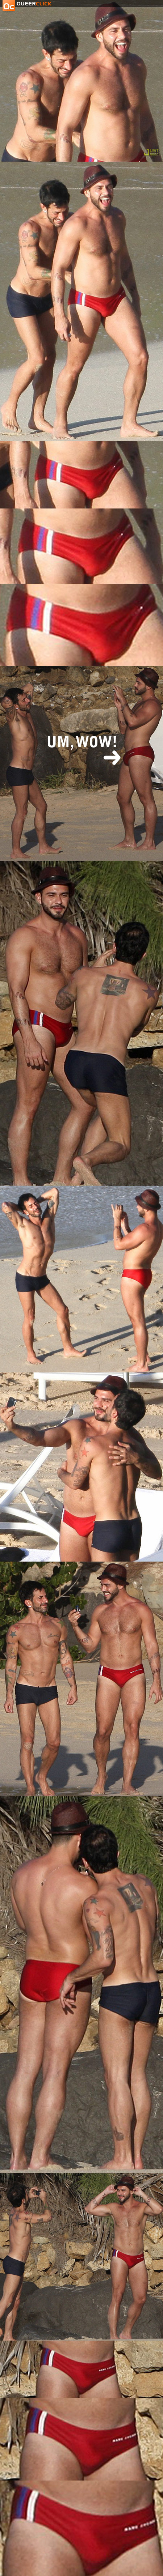 More Beach Pictures of Marc Jacobs and Lorenzo Martone Taking Pictures On Beach